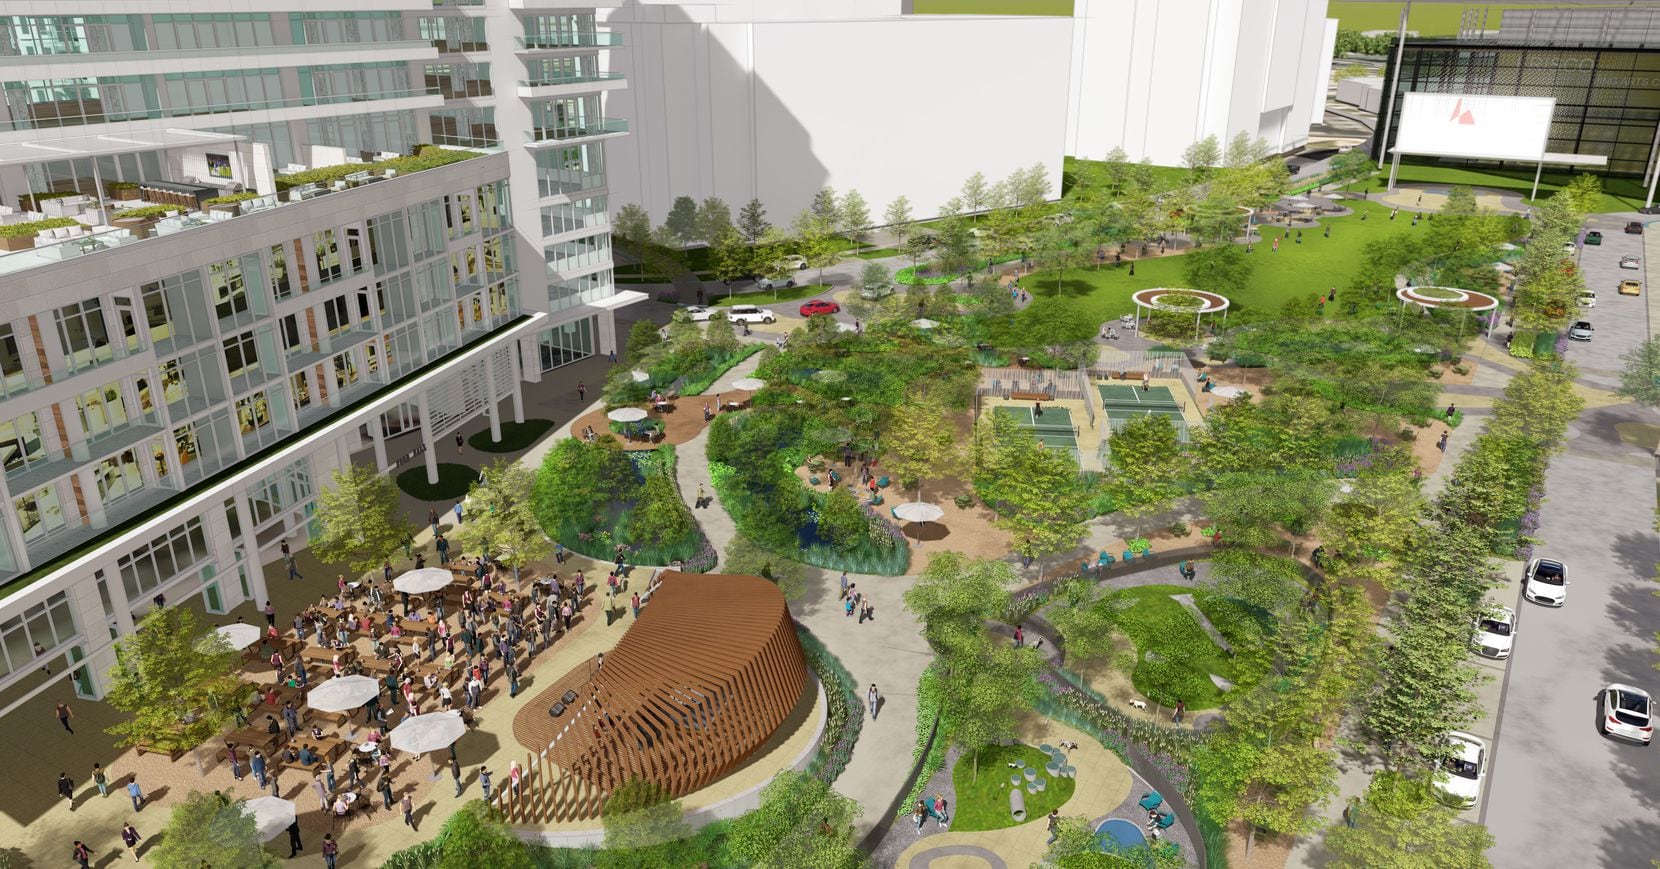 A 10,000 square-foot food hall is part of the new development which includes a park.